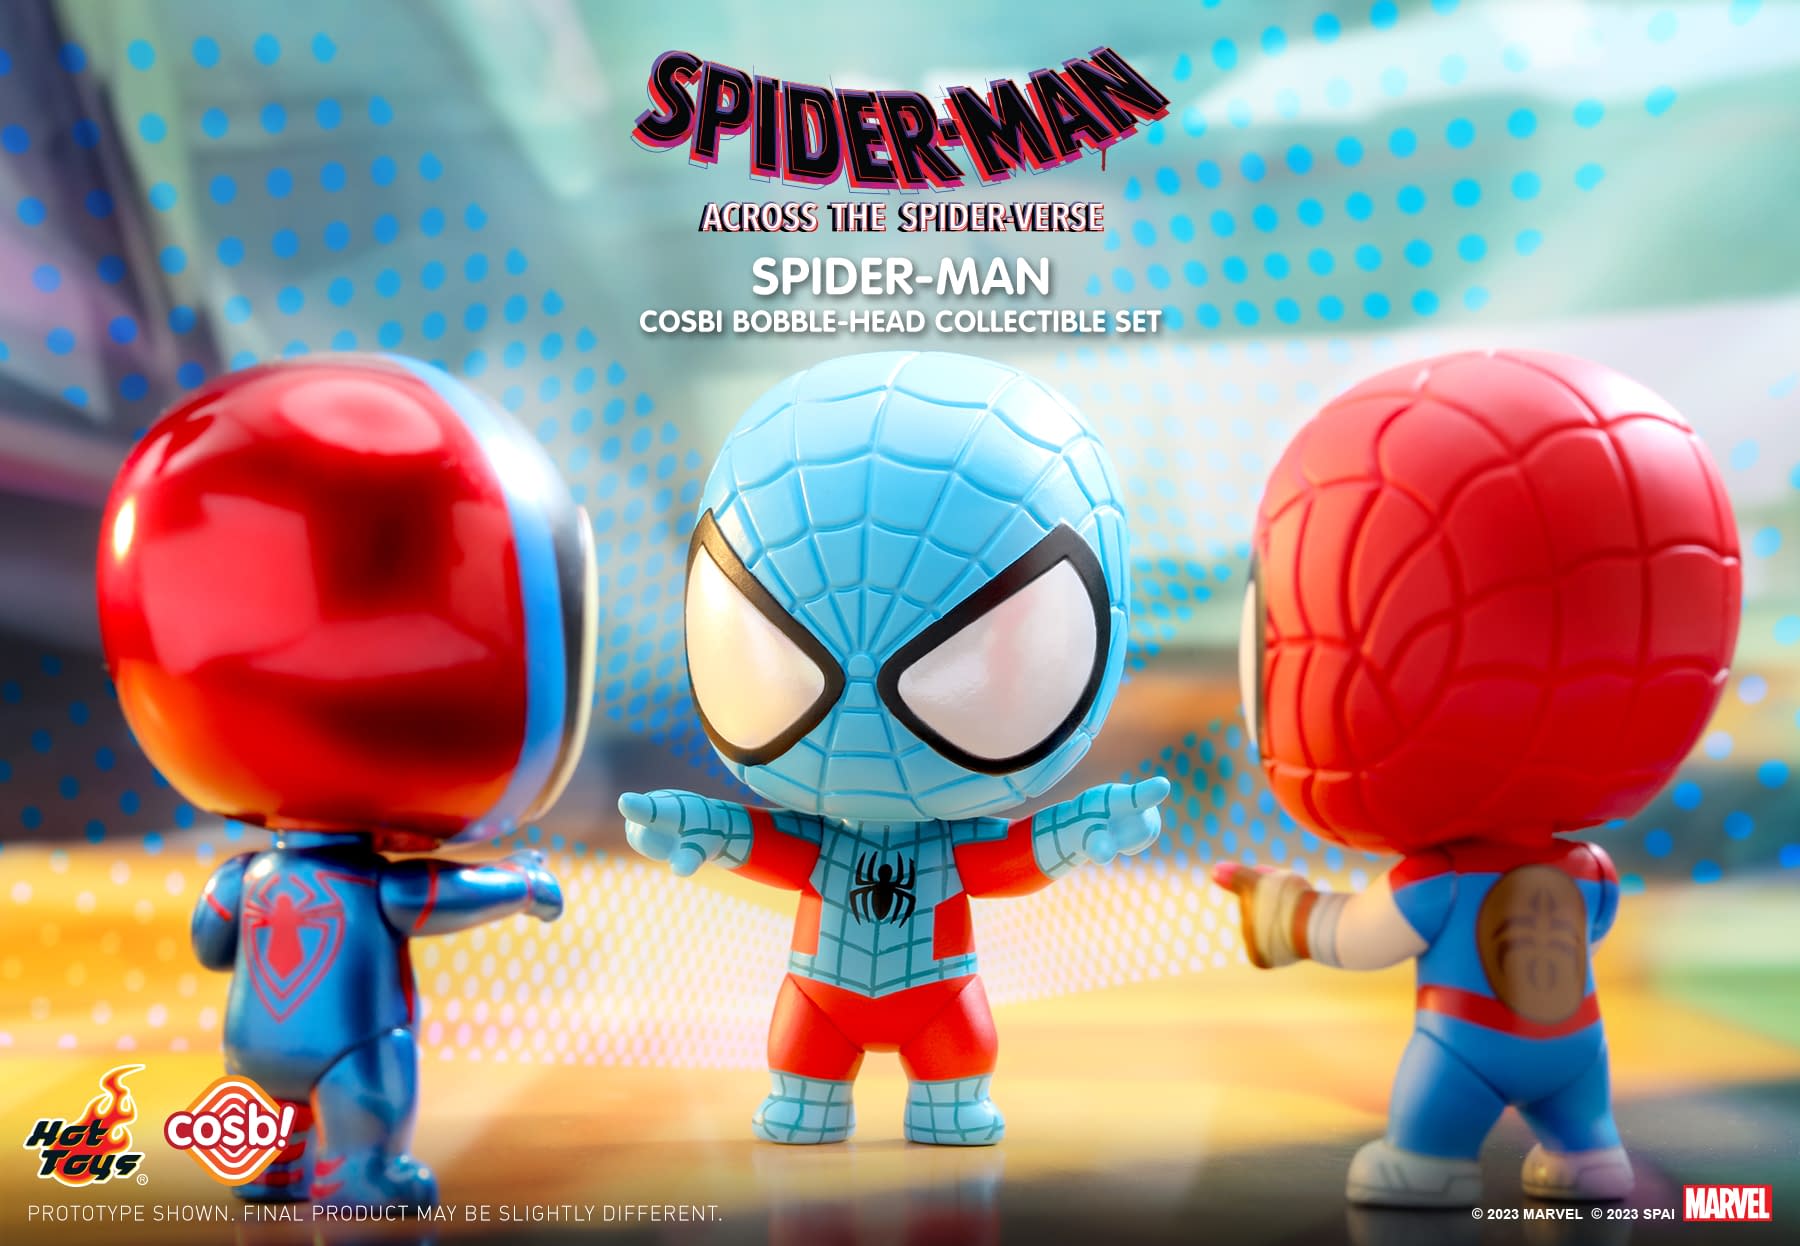 Enter the Spider Society with Hot Toys Newest Spider-Man Cosbi Set2